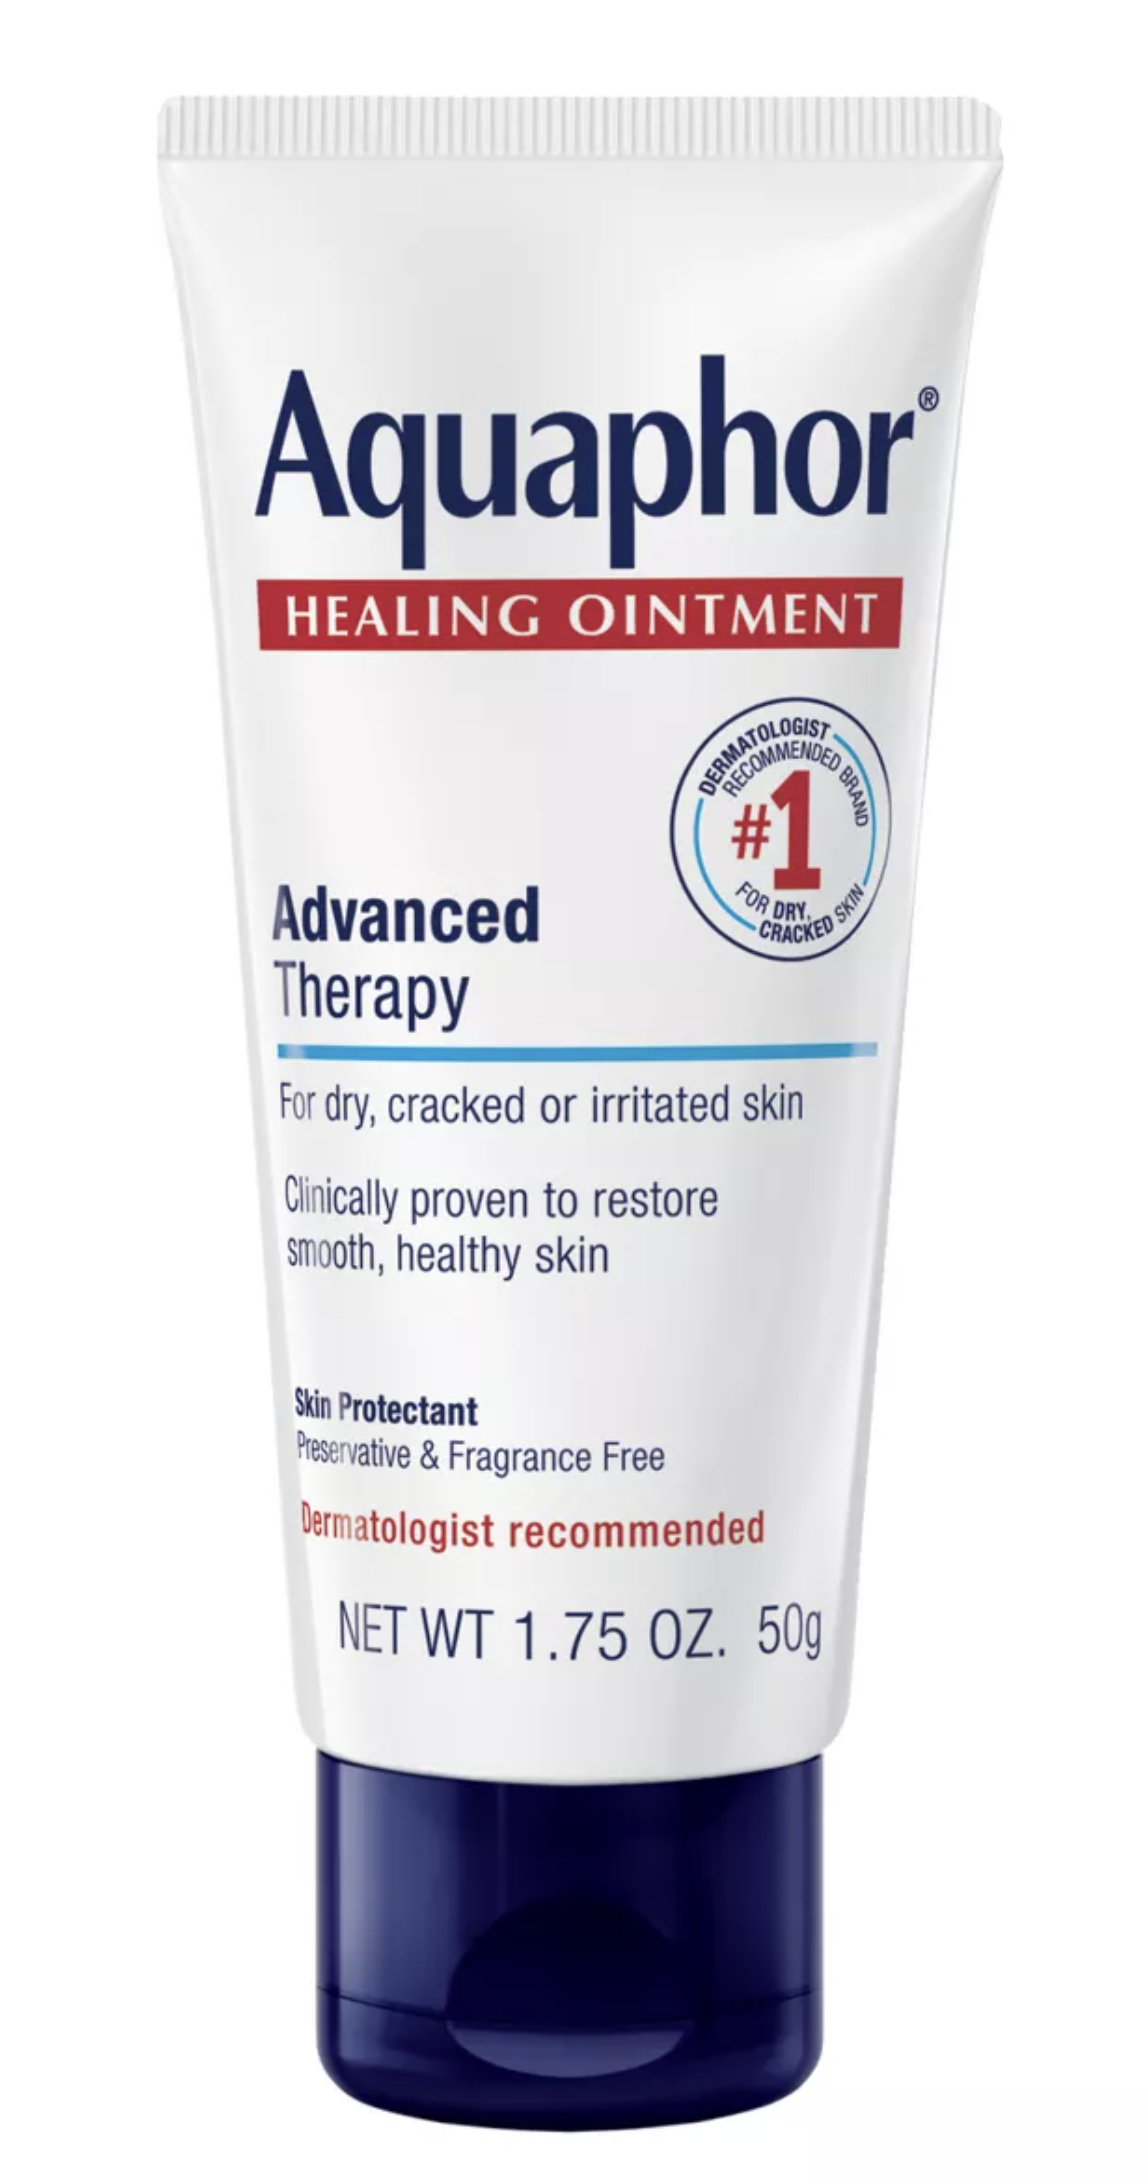 Aquaphor Healing Ointment tube, Advanced Therapy for skin. Text summarizes product benefits and size